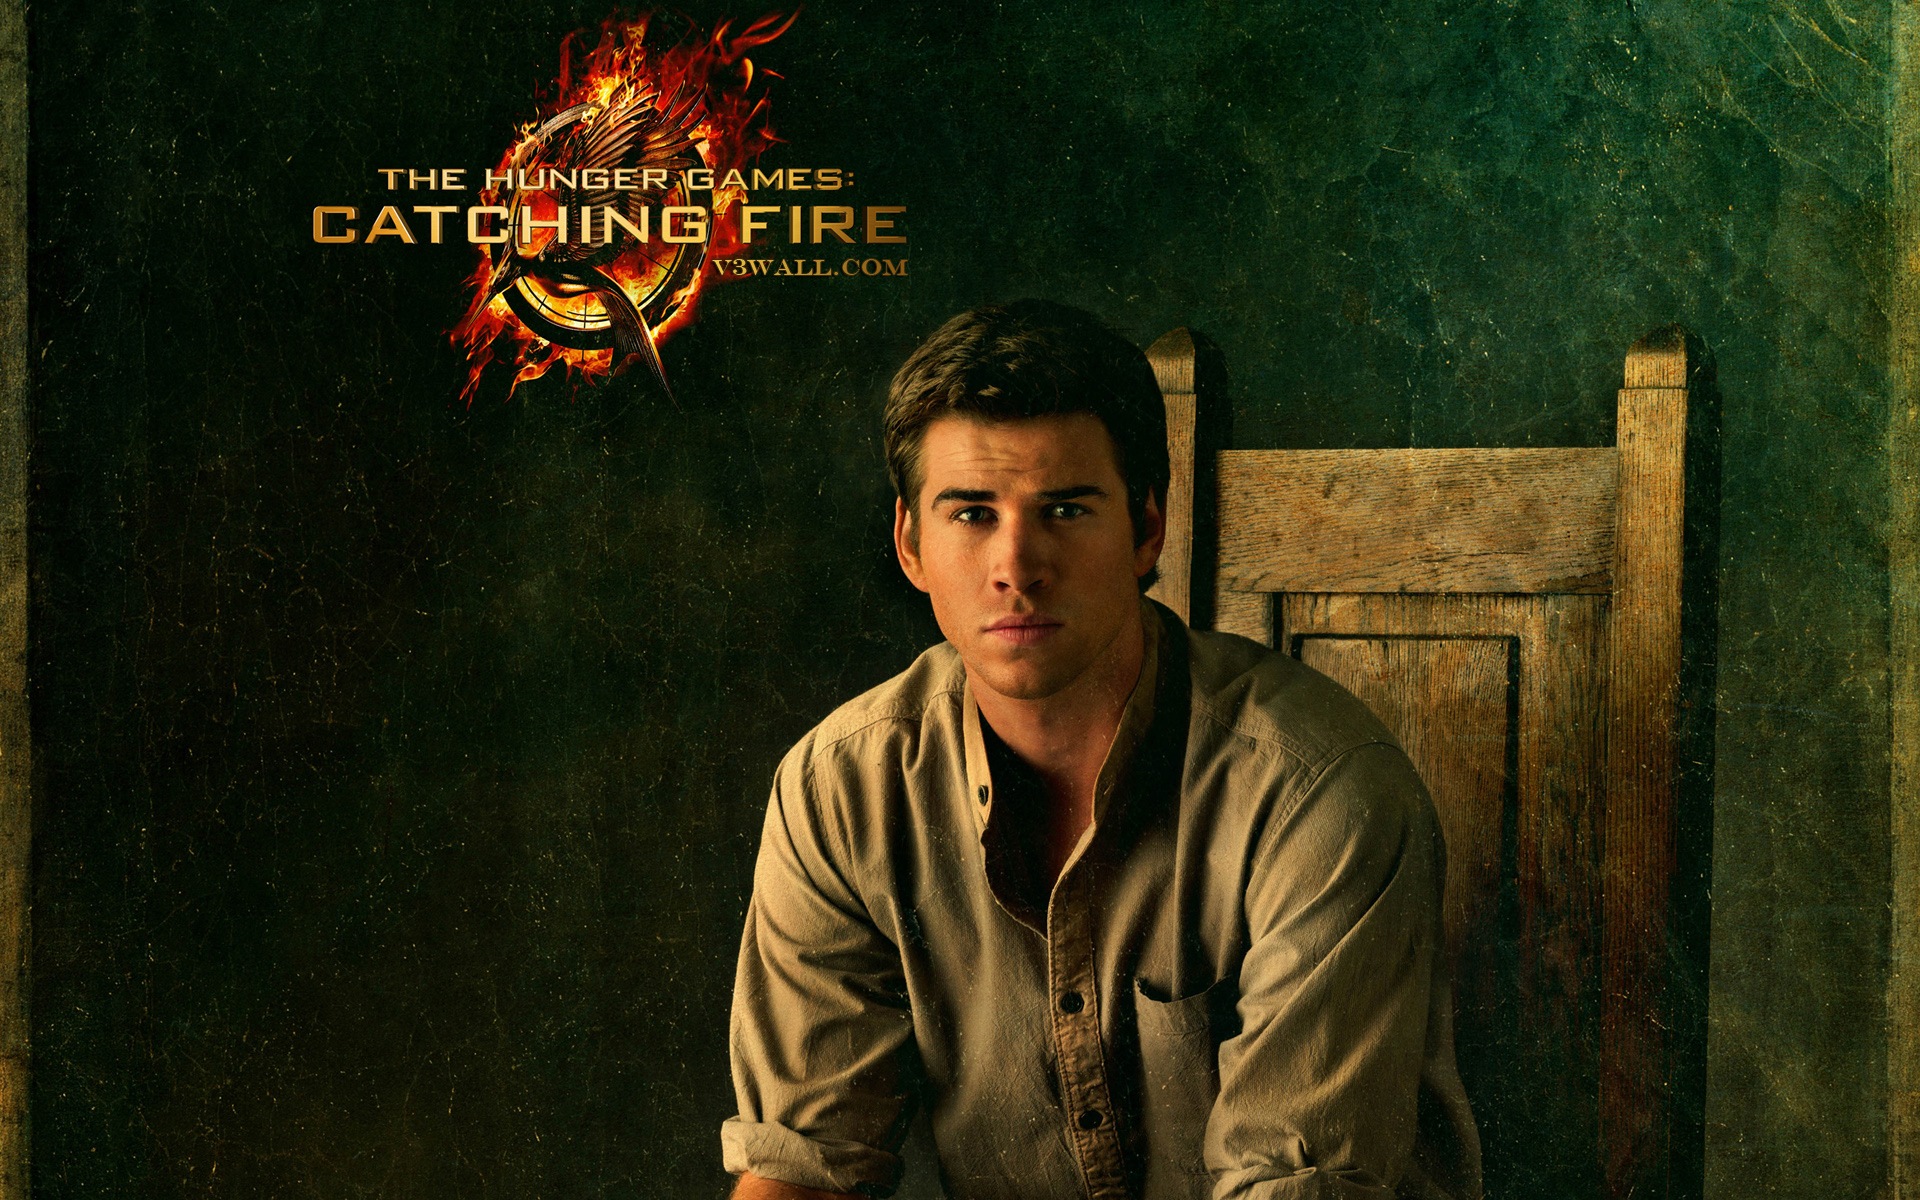 The Hunger Games: Catching Fire wallpapers HD #9 - 1920x1200